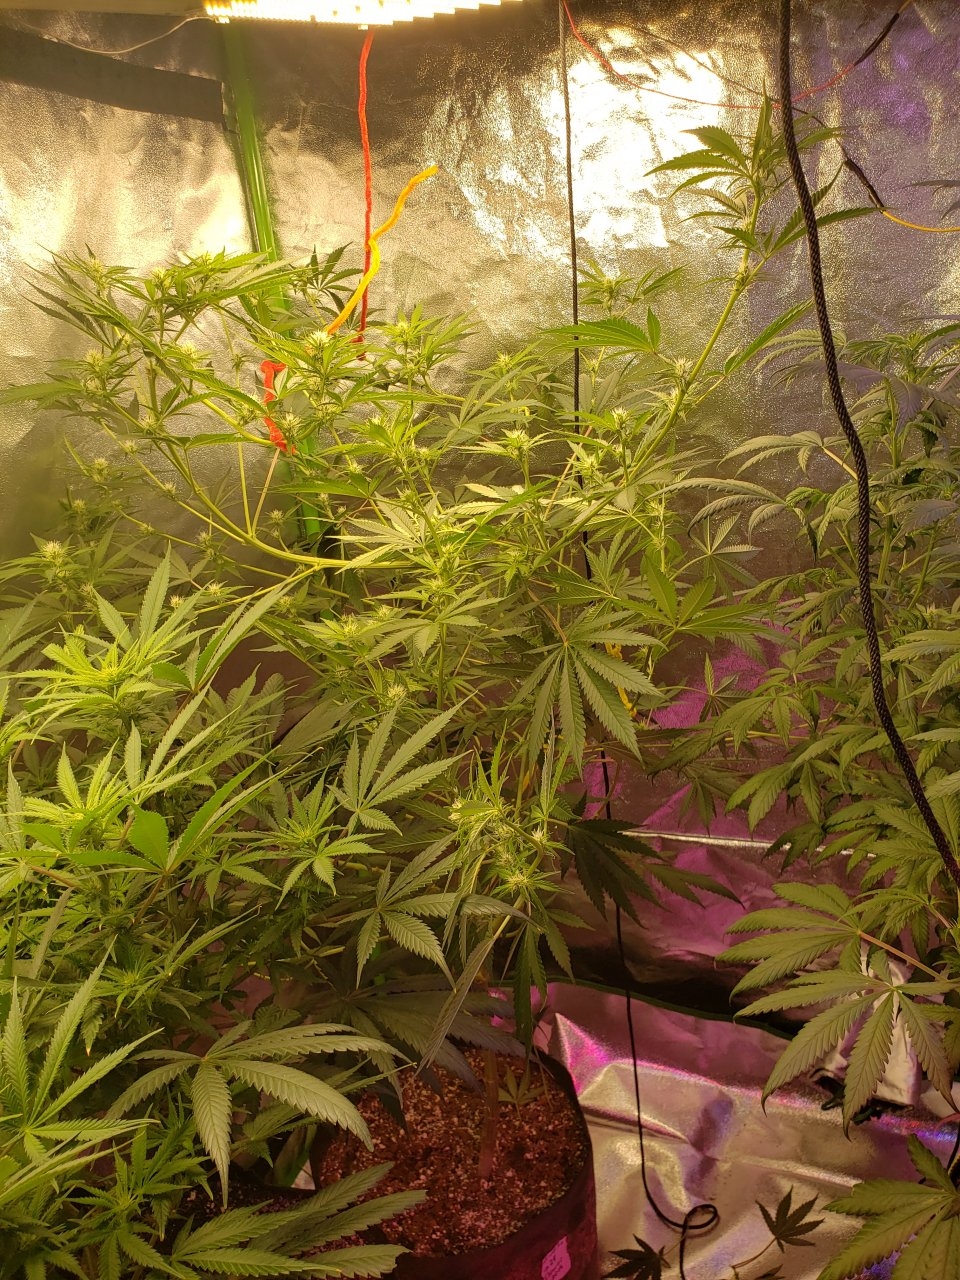 Afrodite roughly 2weeks into flower